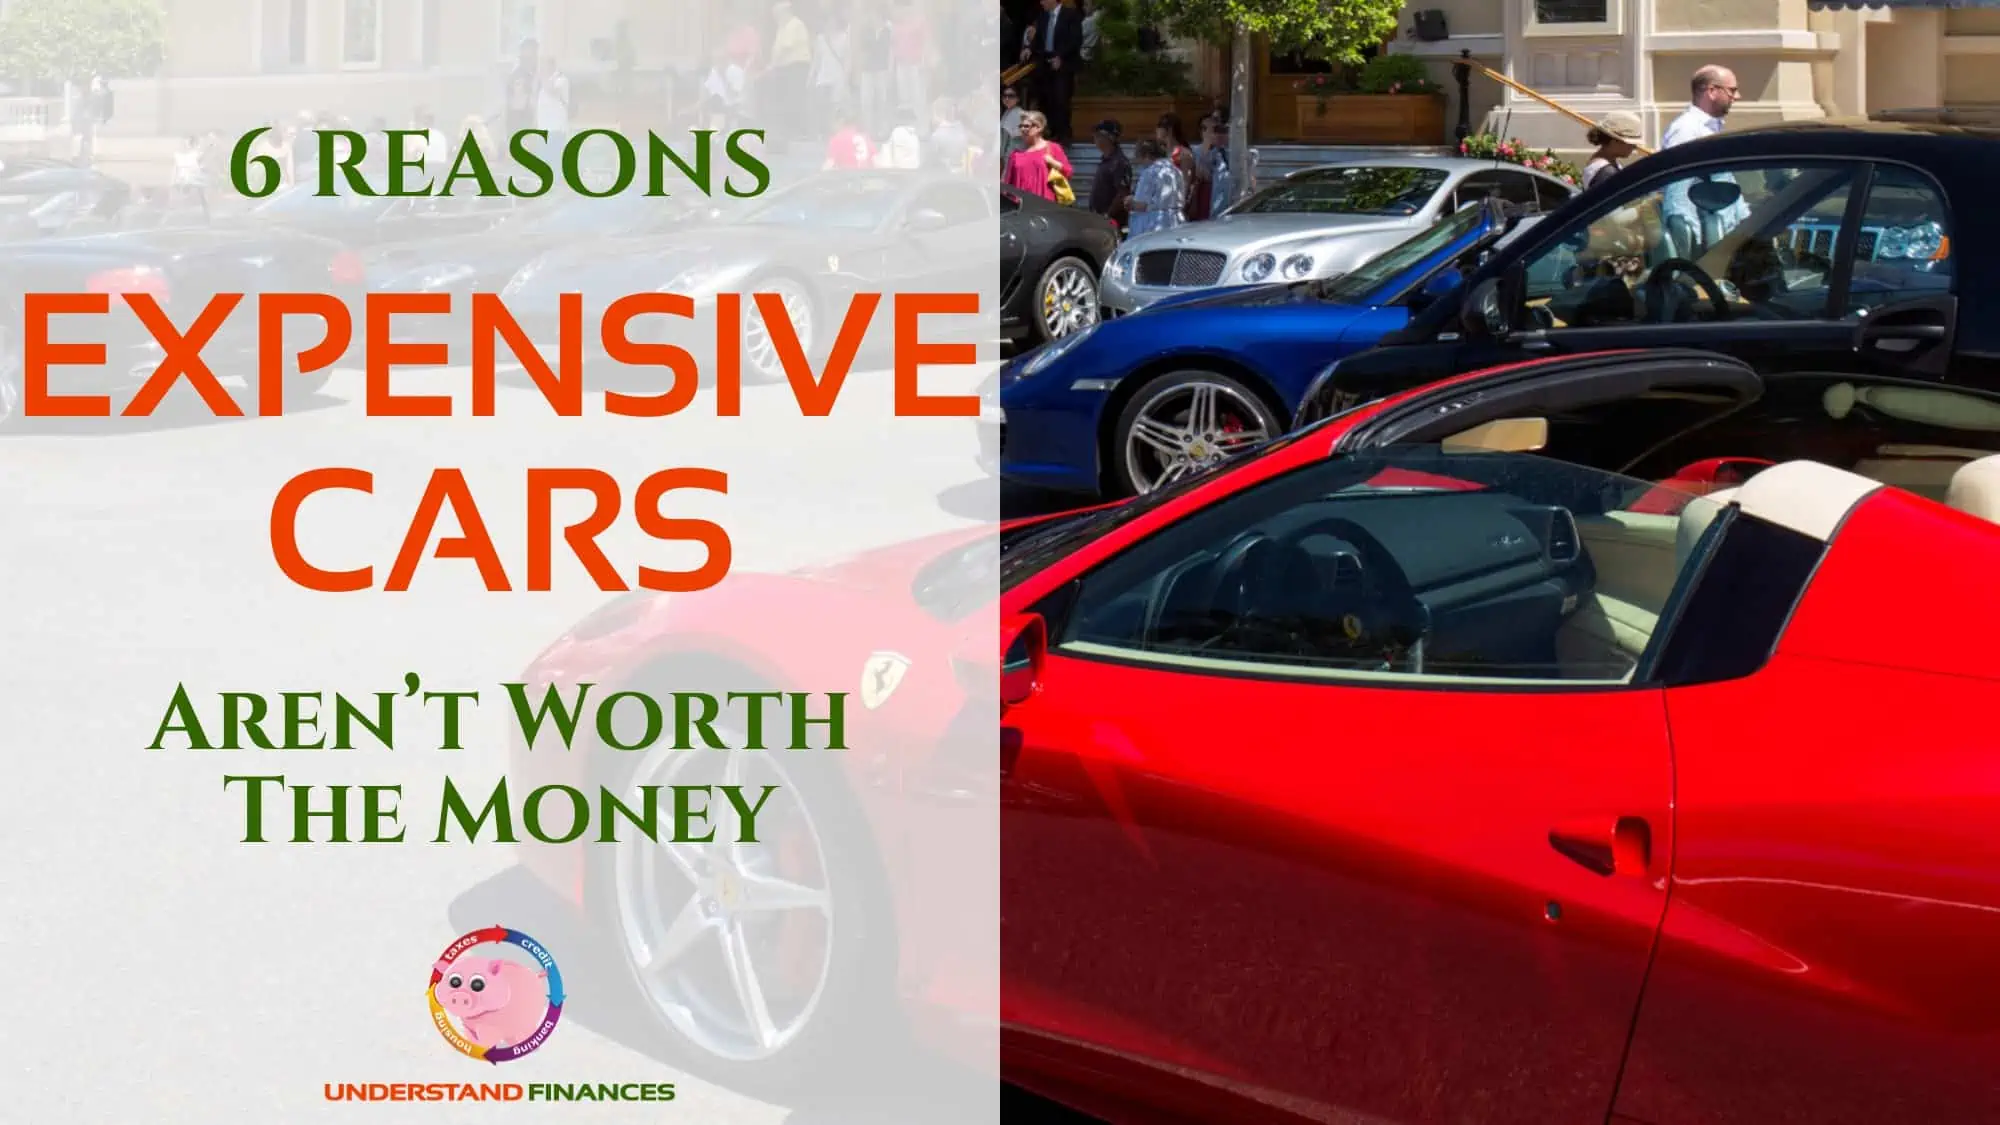 6 Reasons Expensive Cars Aren’t Worth the Money